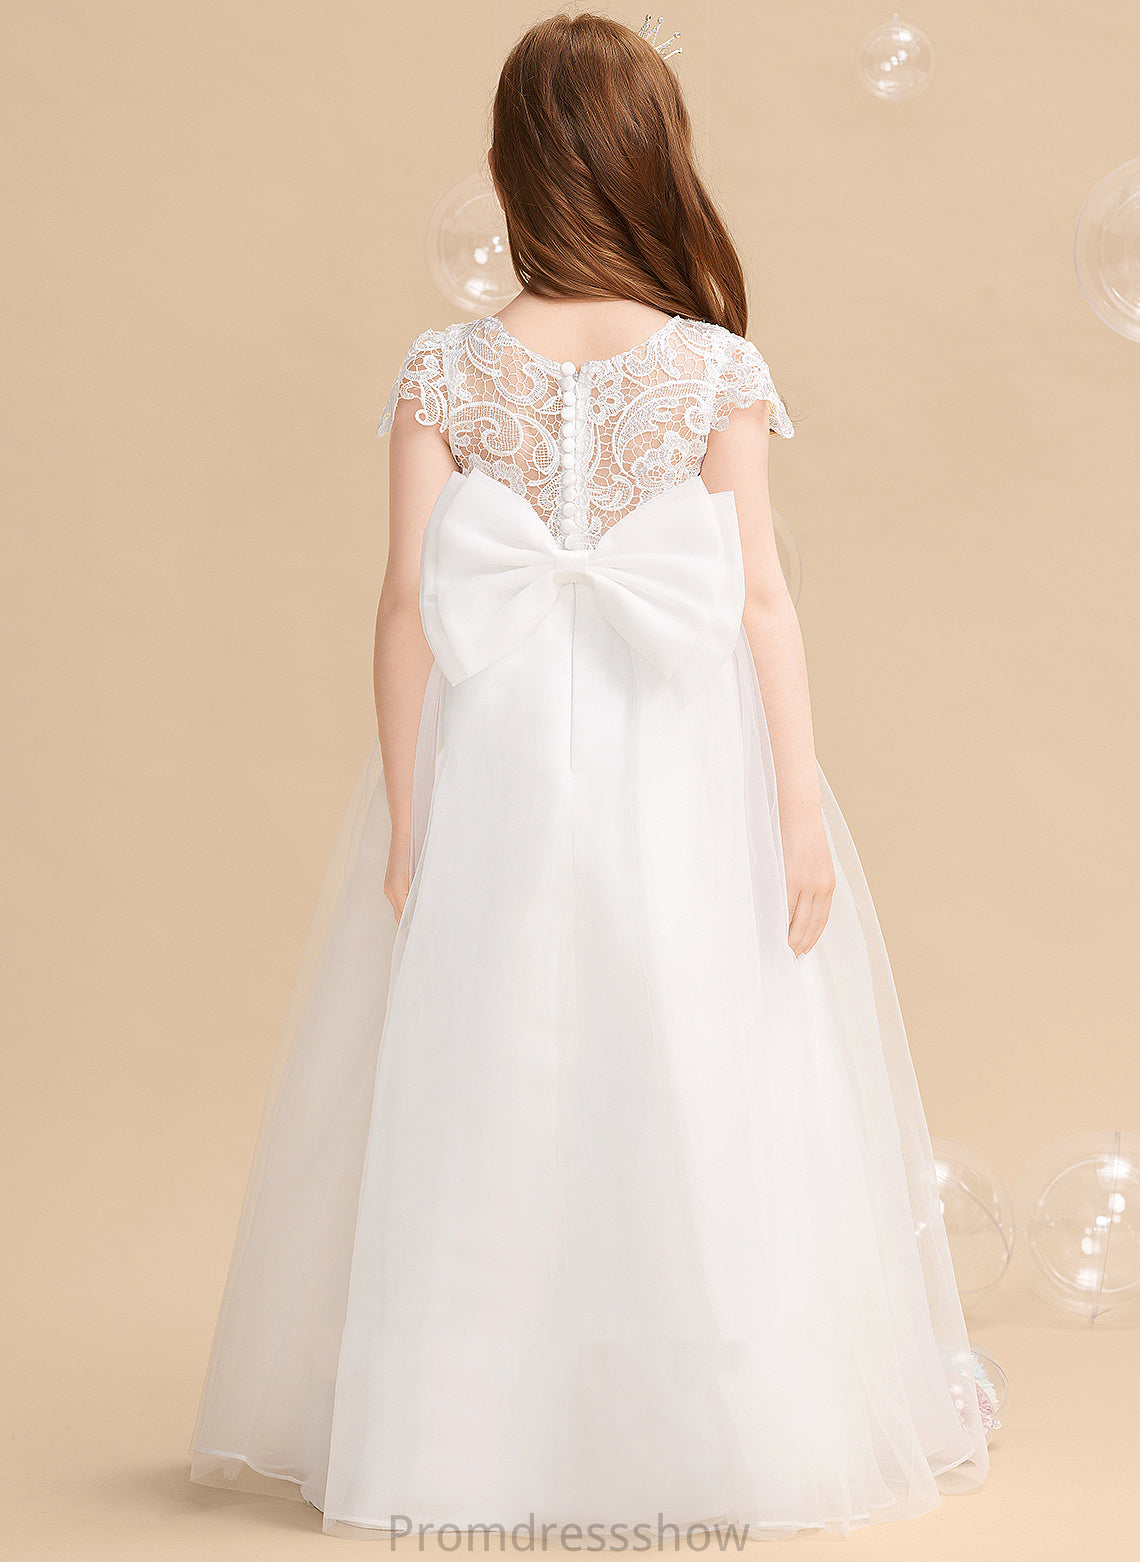 With Kiley Short Floor-length Ball-Gown/Princess - Flower Girl Dresses Tulle/Lace Neck Sleeves Dress Girl Flower Bow(s) Scoop